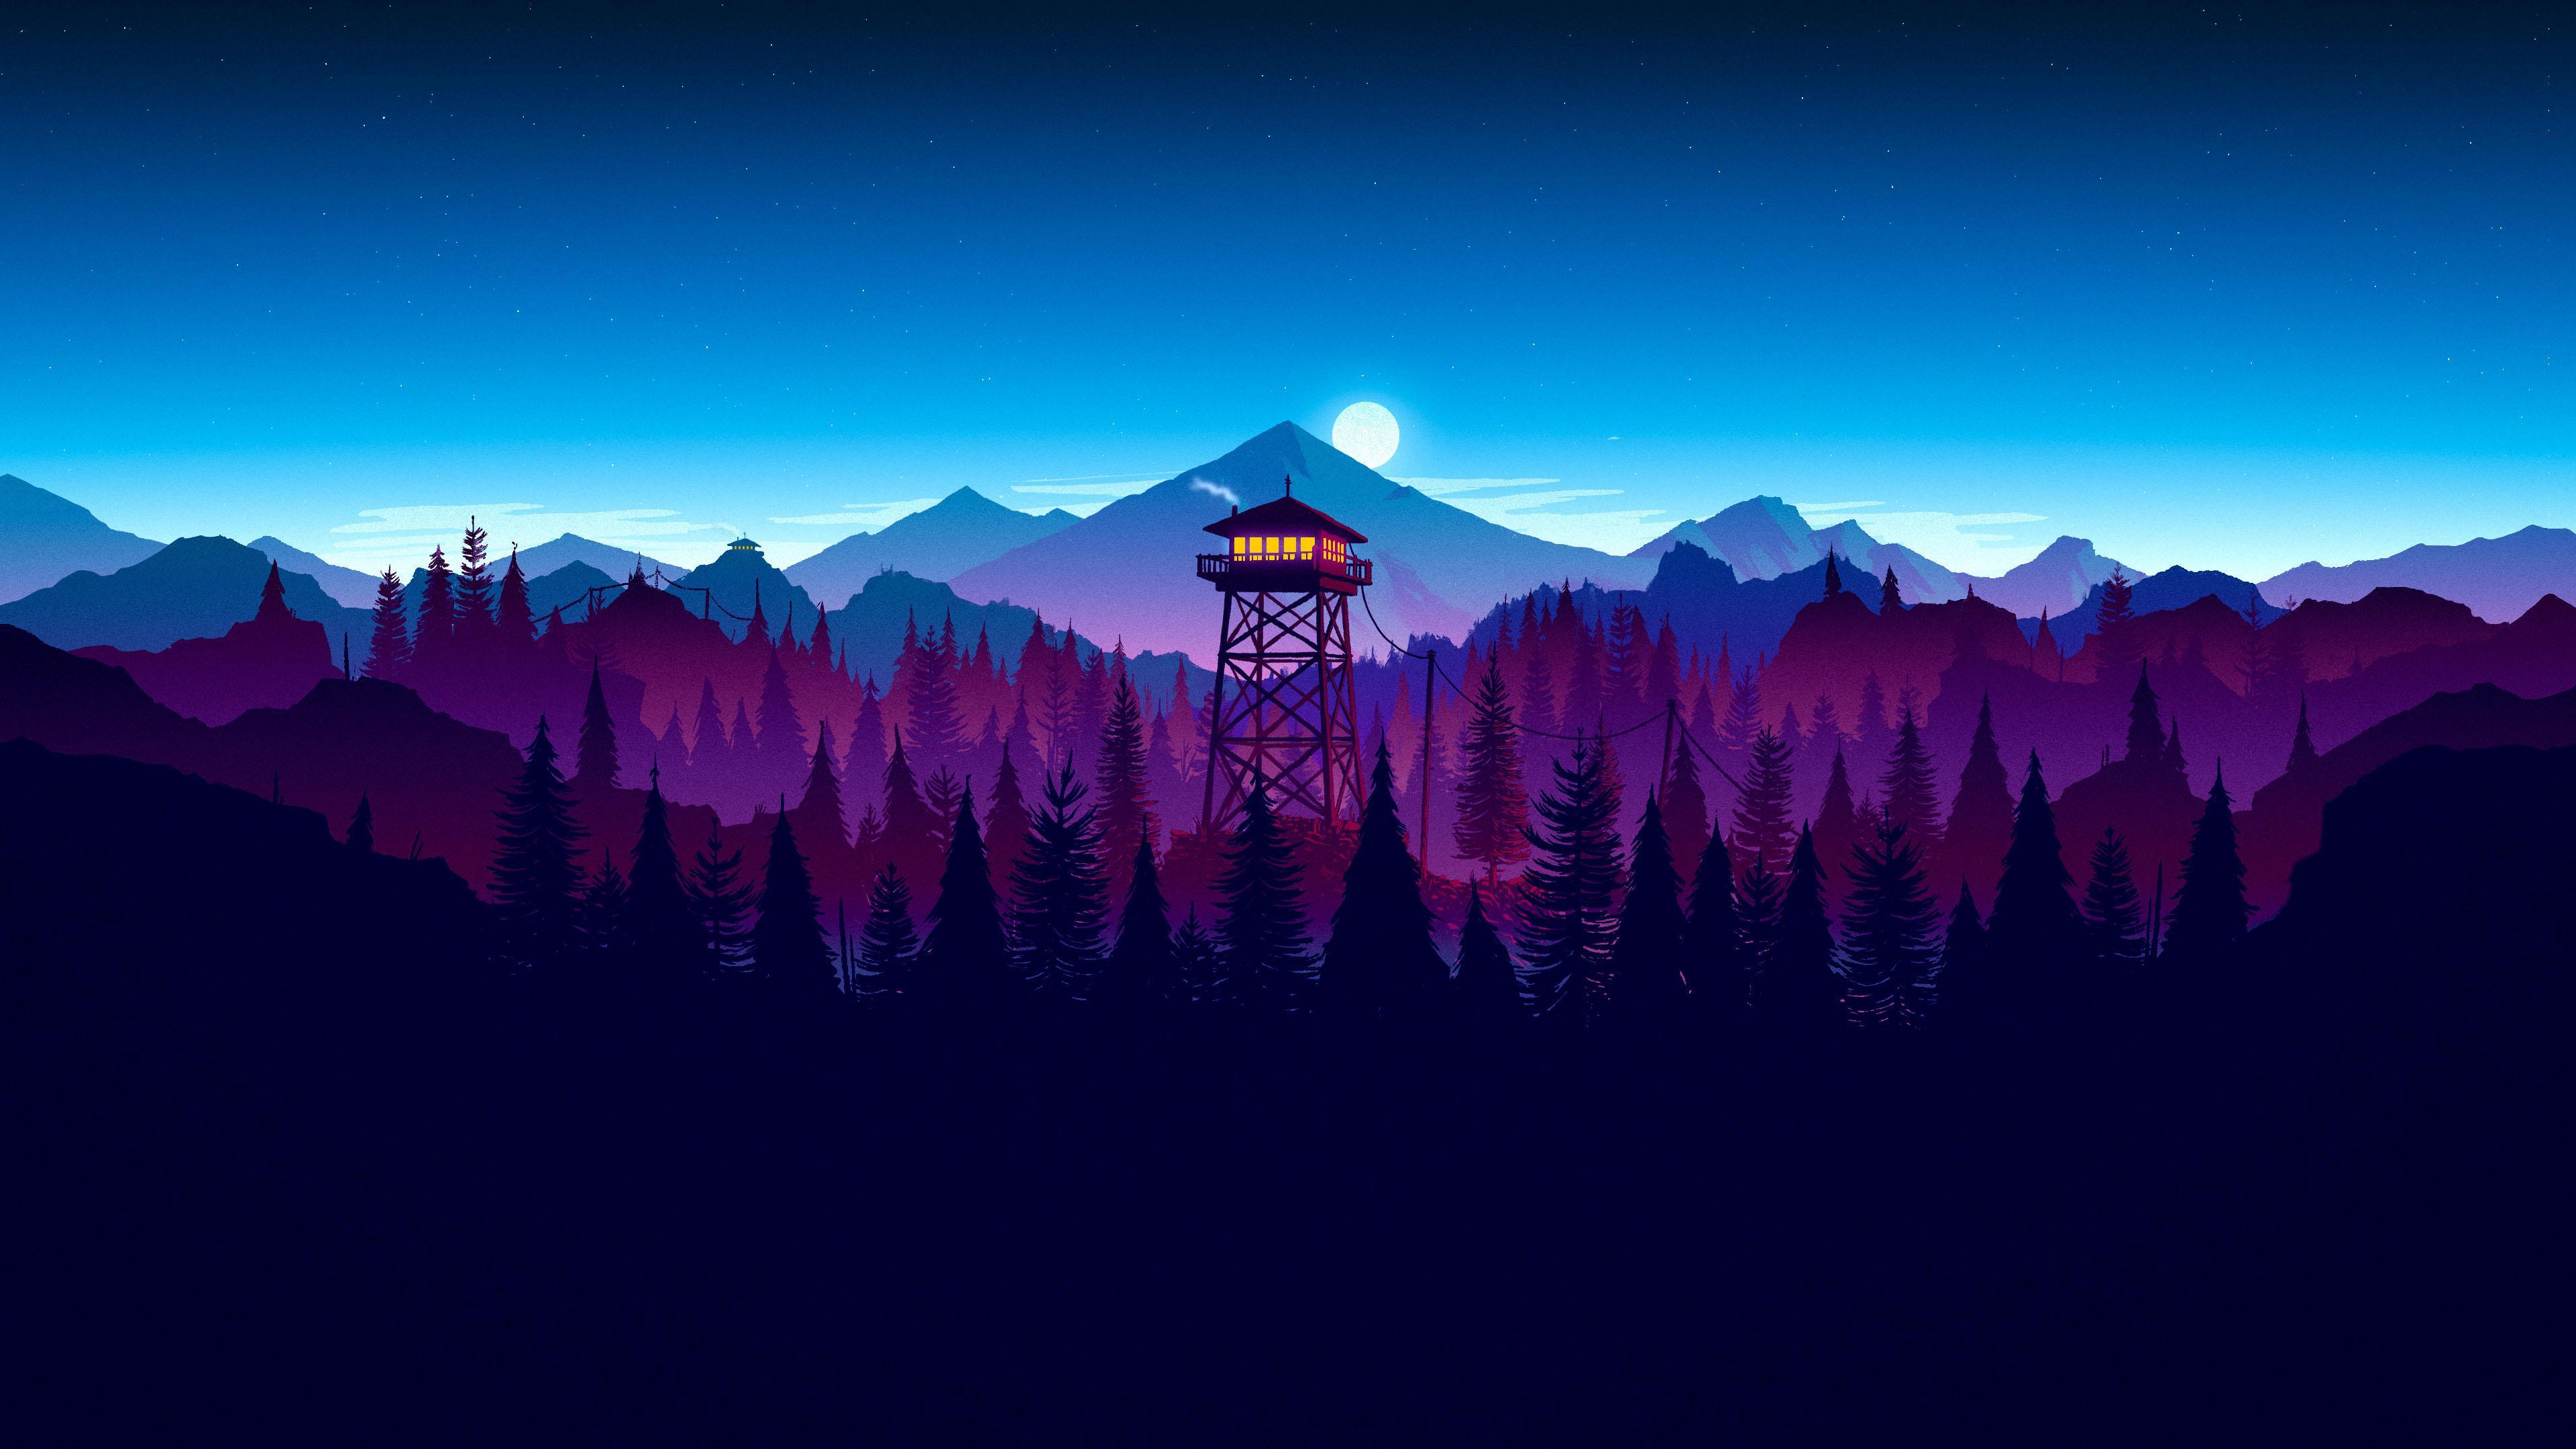 firewatch 4K wallpaper for your desktop or mobile screen